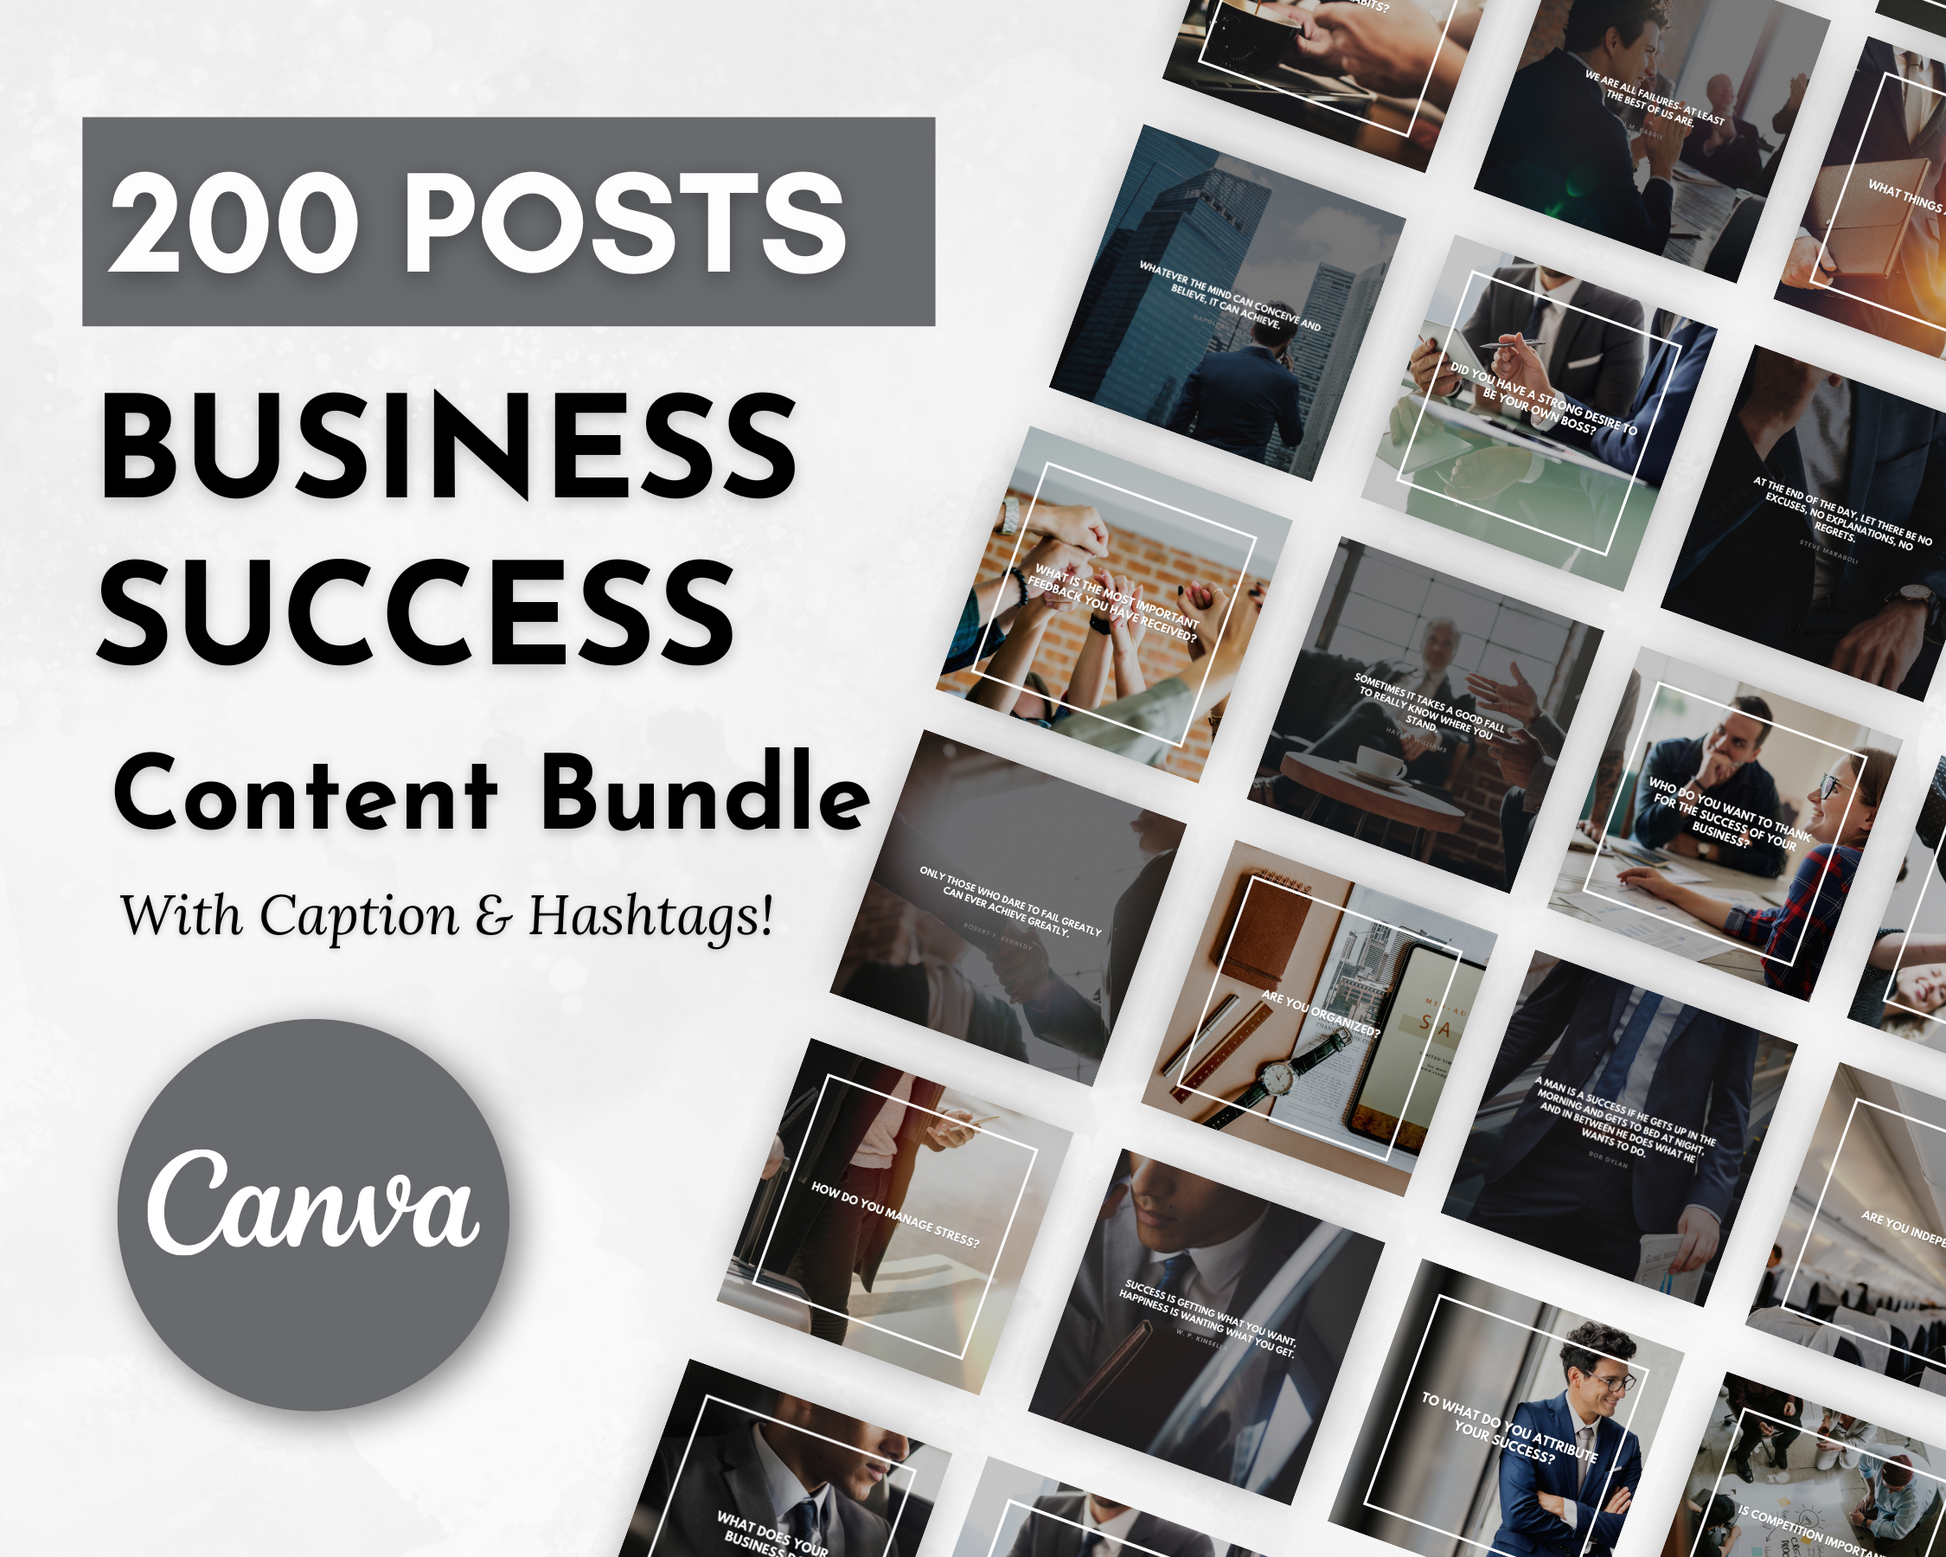 200 ready to post social media images and text for Socially Inclined's Business Success Social Media Post Bundle with Canva Templates.